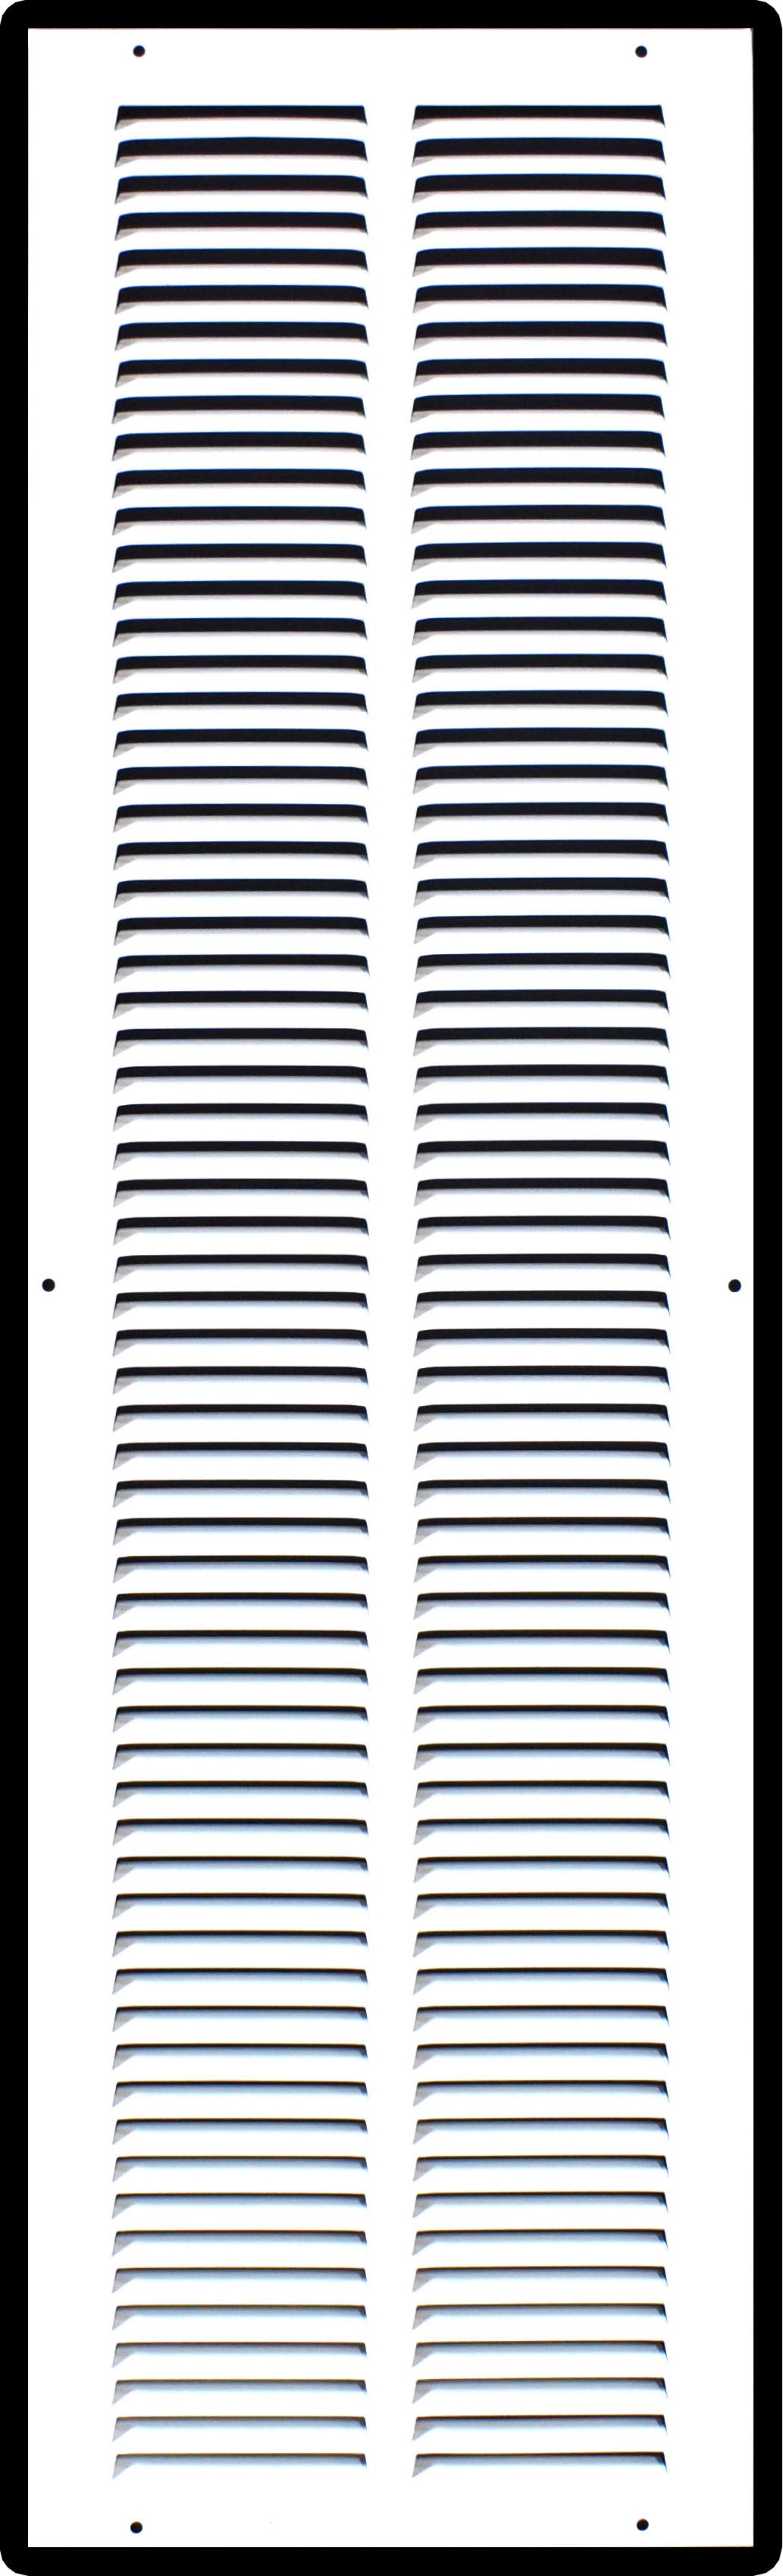 airgrilles 8" x 32" duct opening steel return air grille for sidewall and ceiling hnd-flt-1rag-wh-8x32 752505984216 1